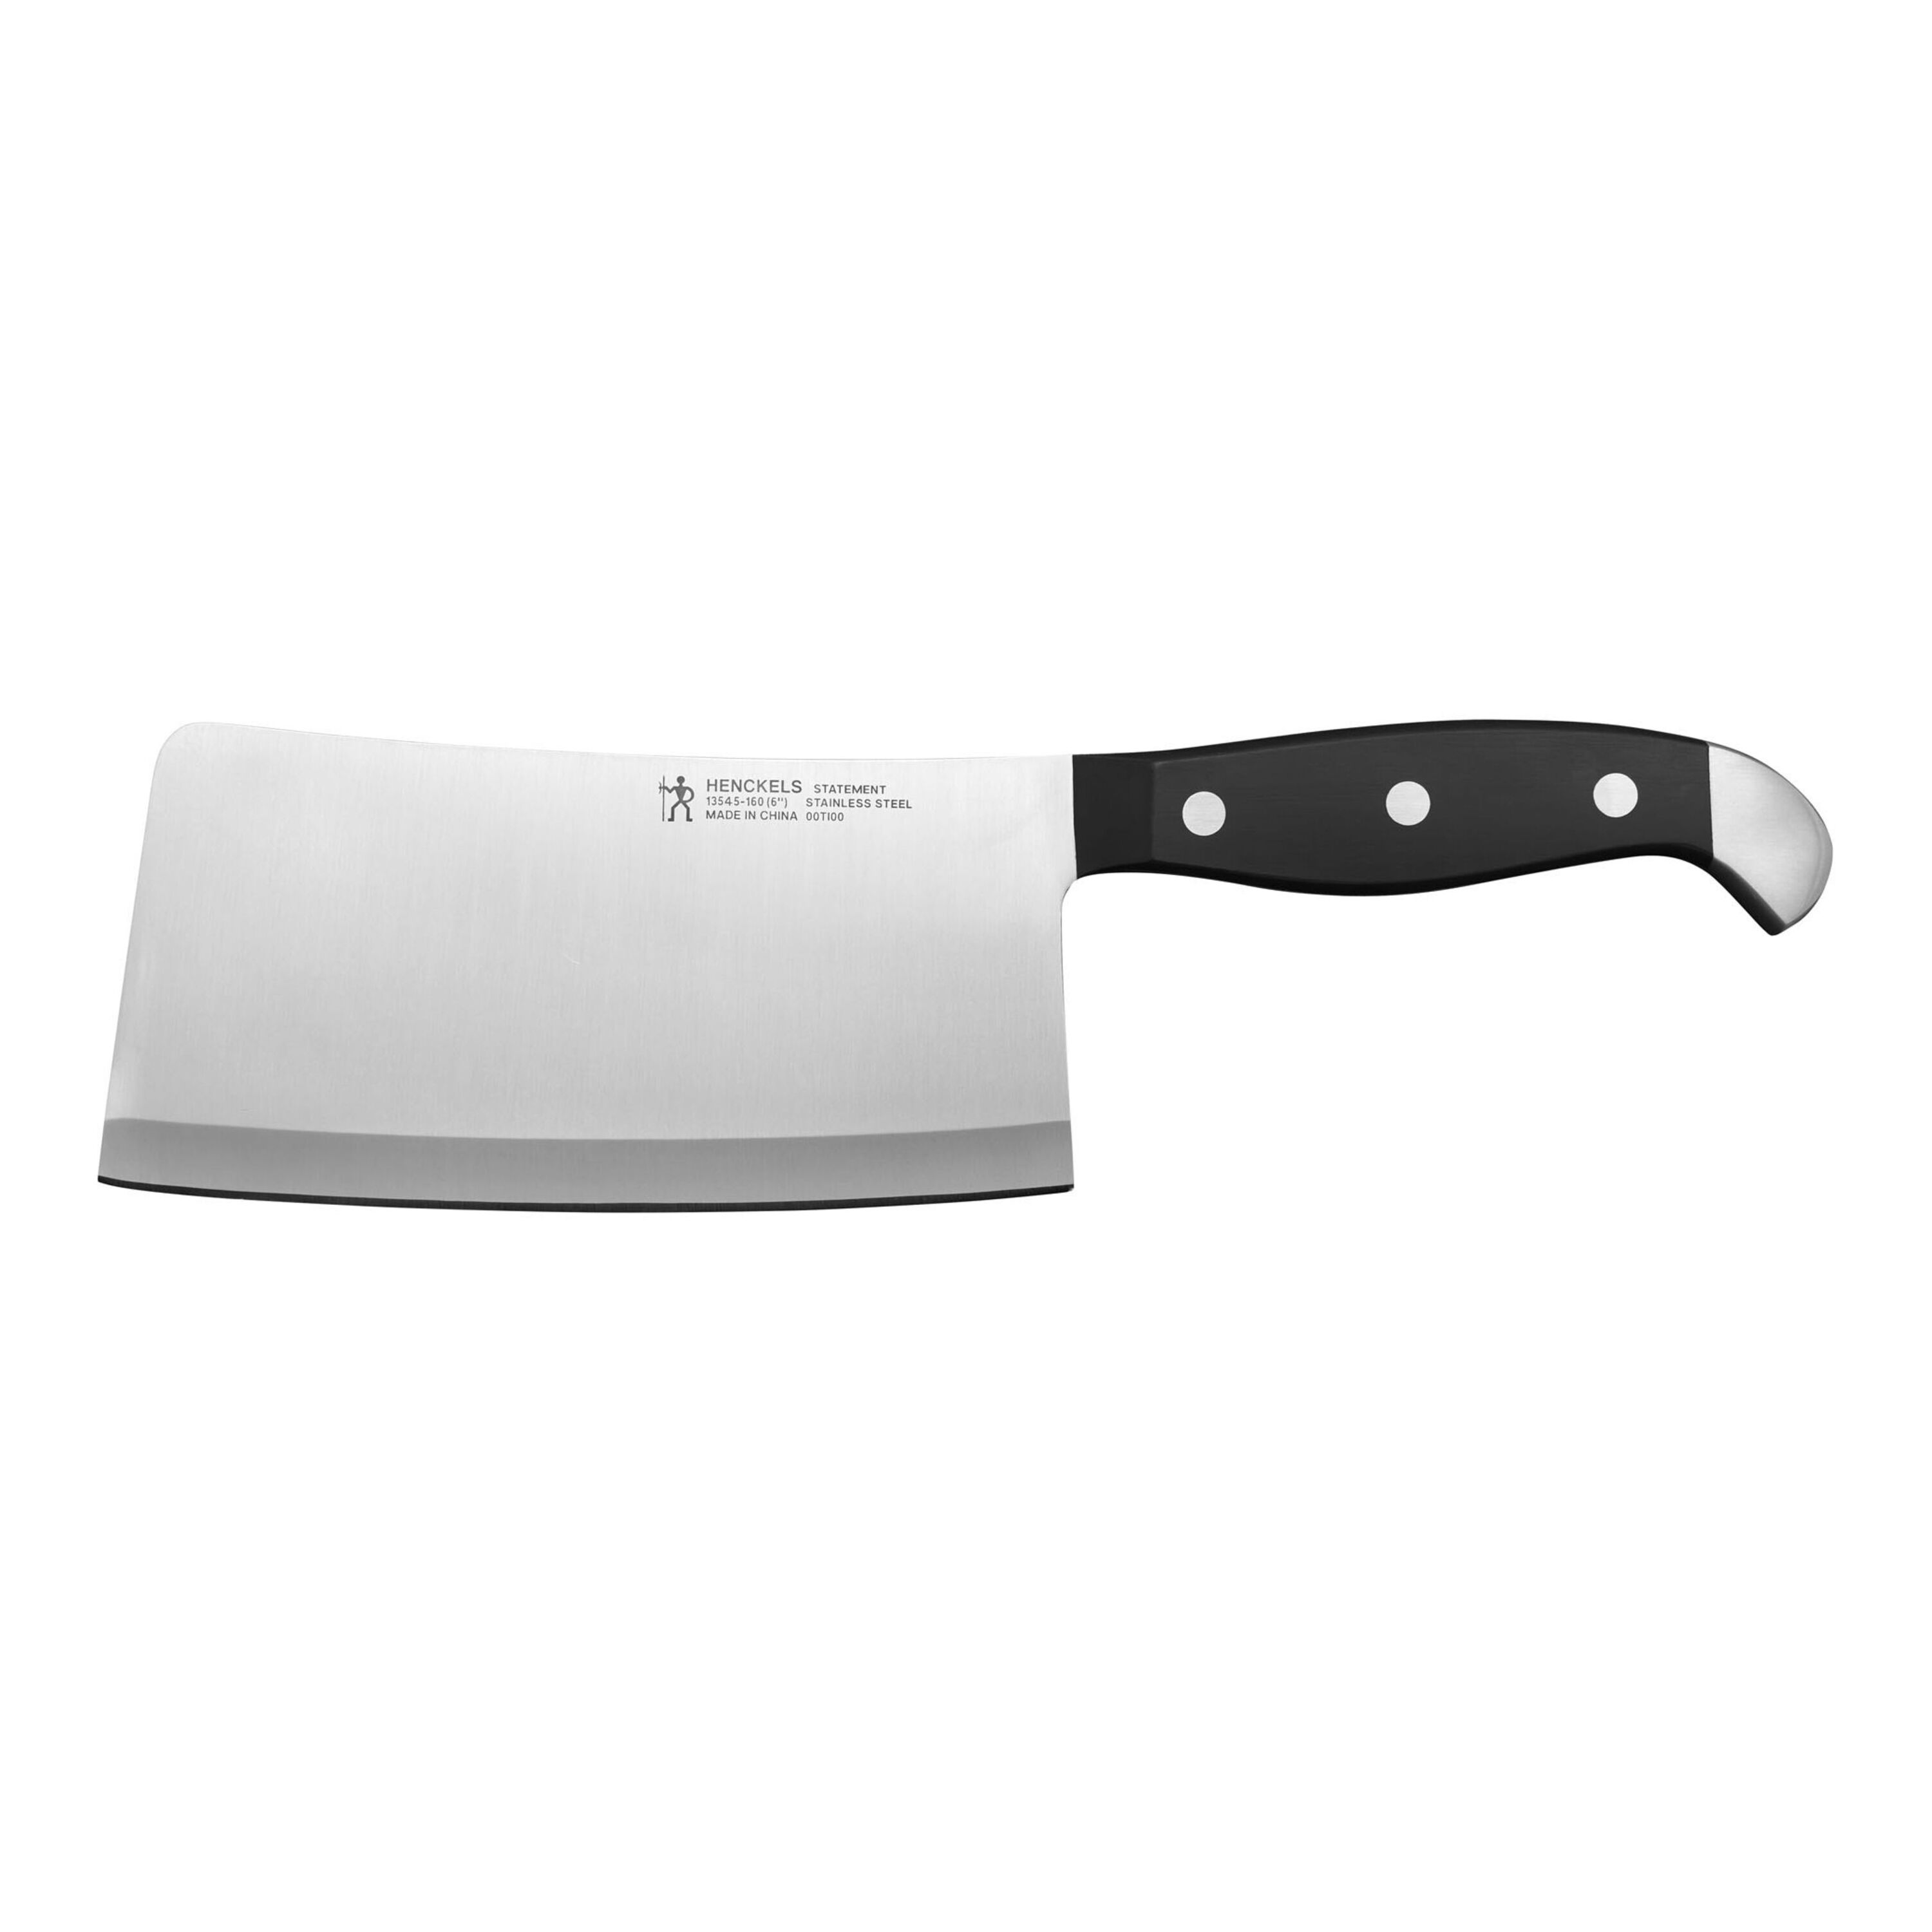 Buy ZWILLING TWIN Master Cleaver